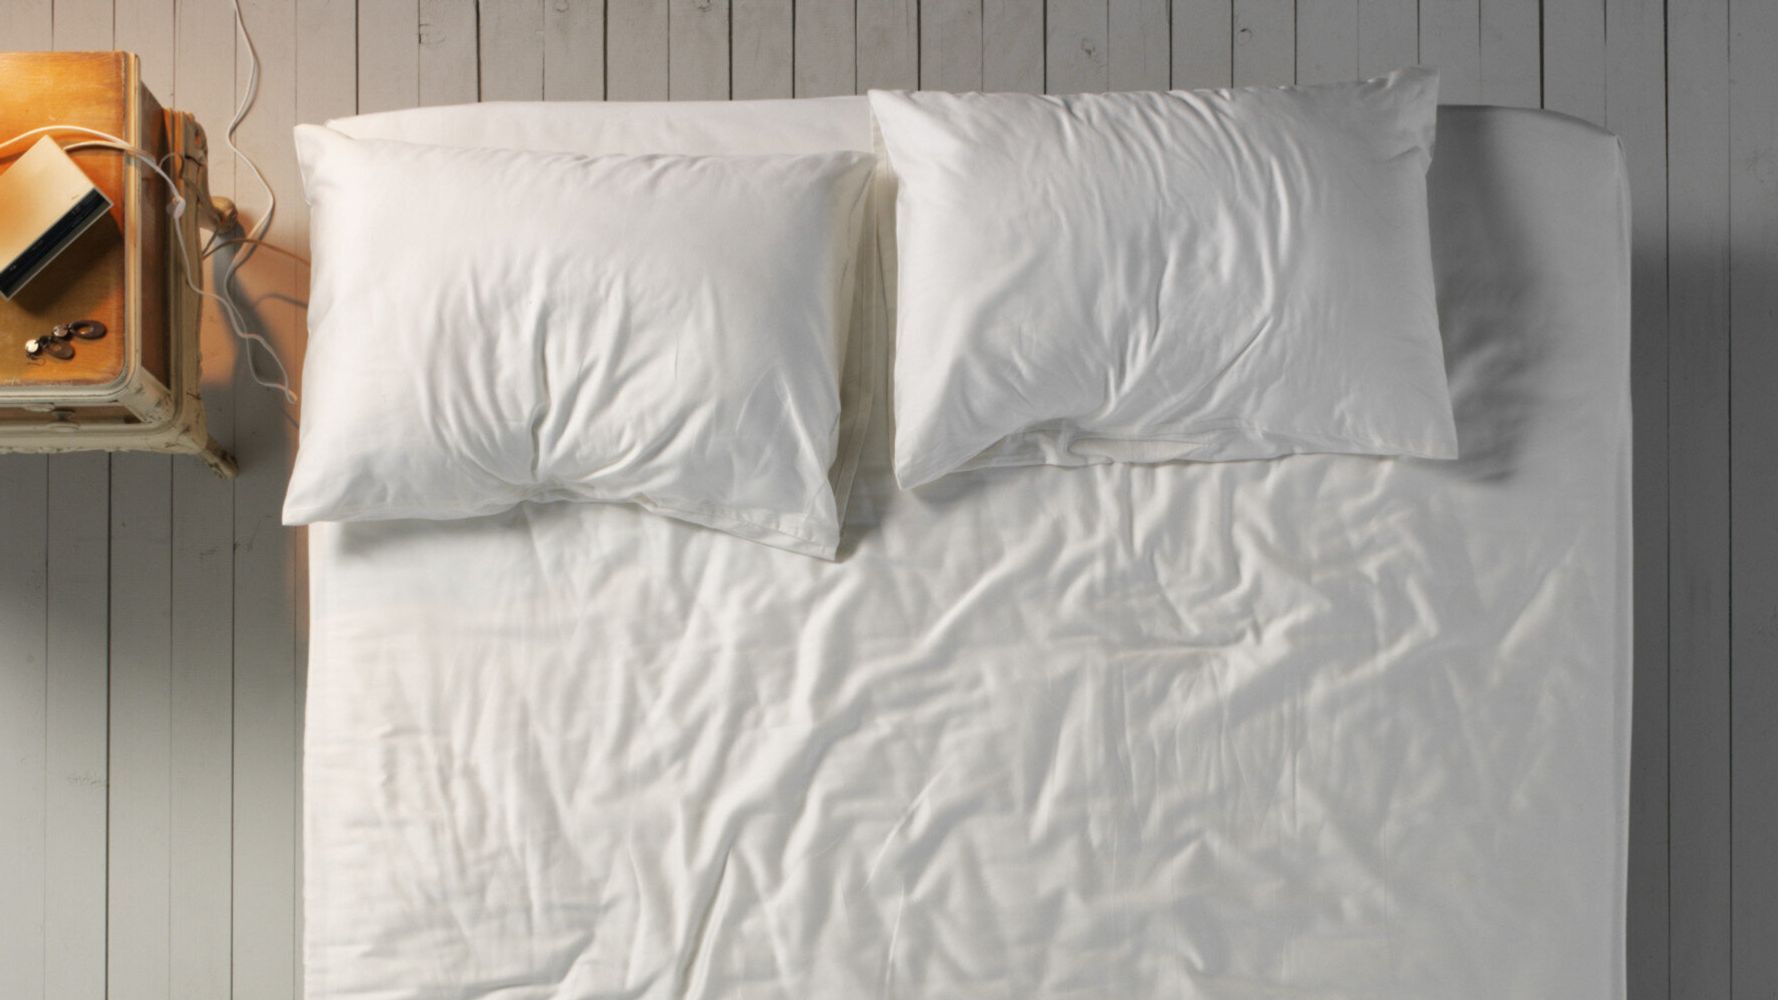 Gross Video Shows How Your Bed May Be Filled With